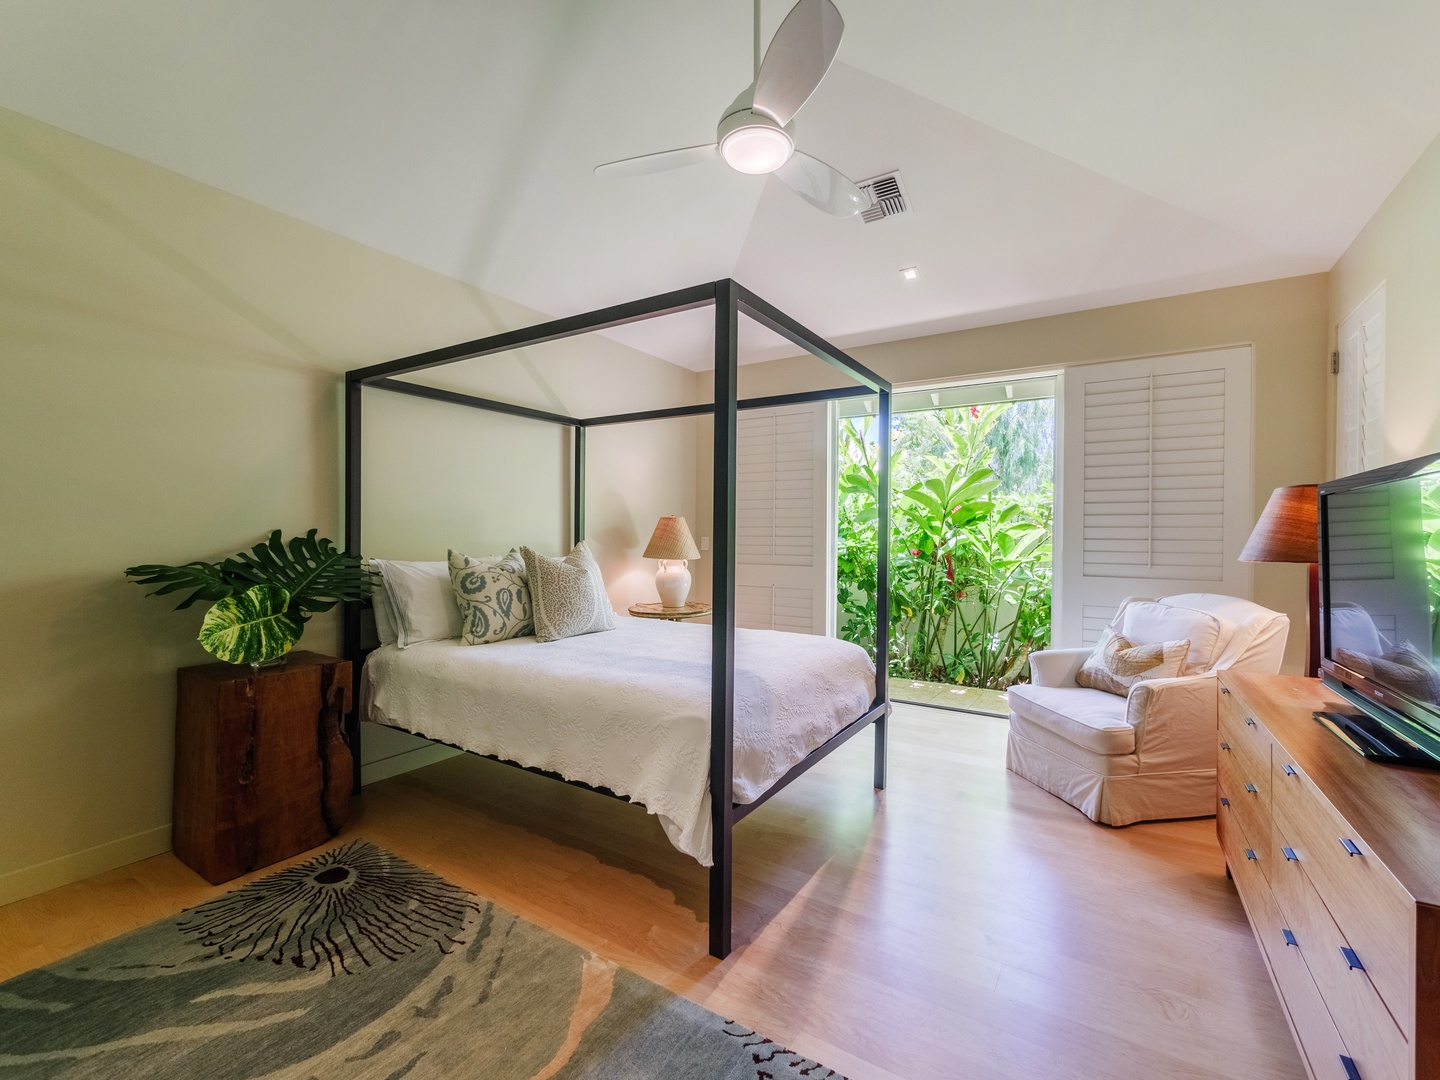 Honolulu Vacation Rentals, Paradise Beach Estate - Guest suite with four poster bed and an access outdoors